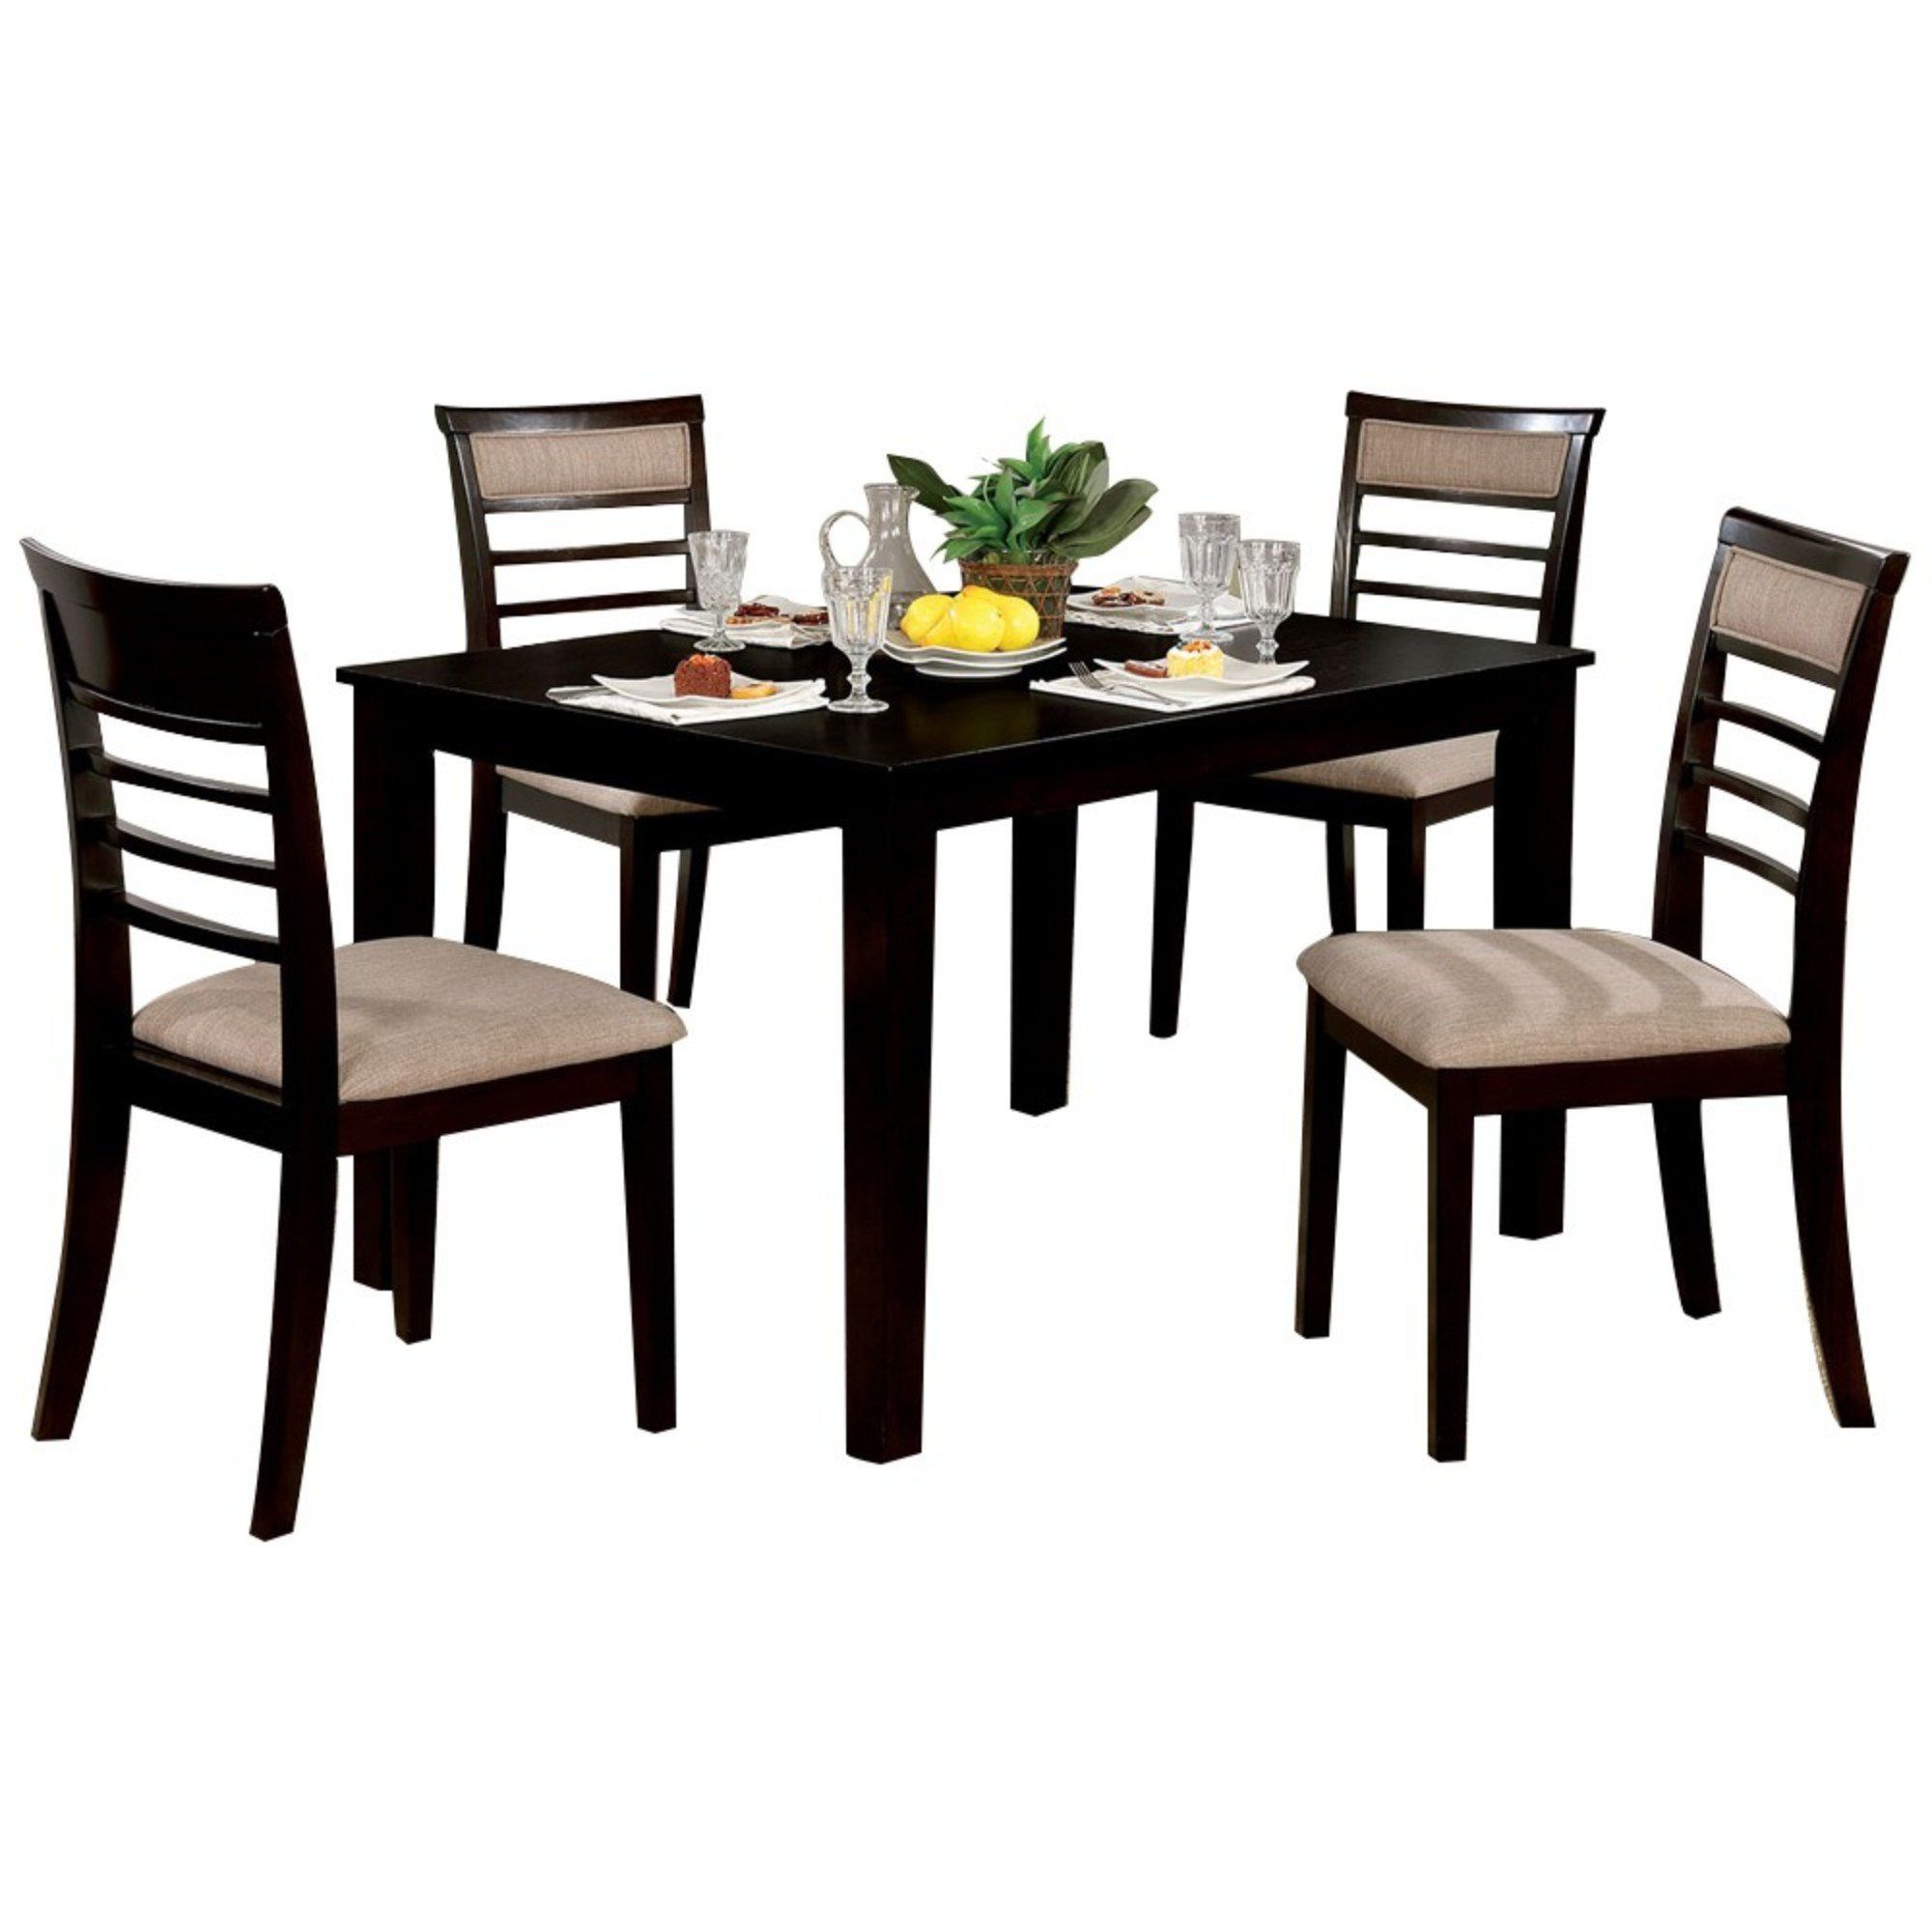 Best And Newest Hanska Wooden 5 Piece Counter Height Dining Table Set With Regard To Hanska Wooden 5 Piece Counter Height Dining Table Sets (set Of 5) (View 1 of 20)